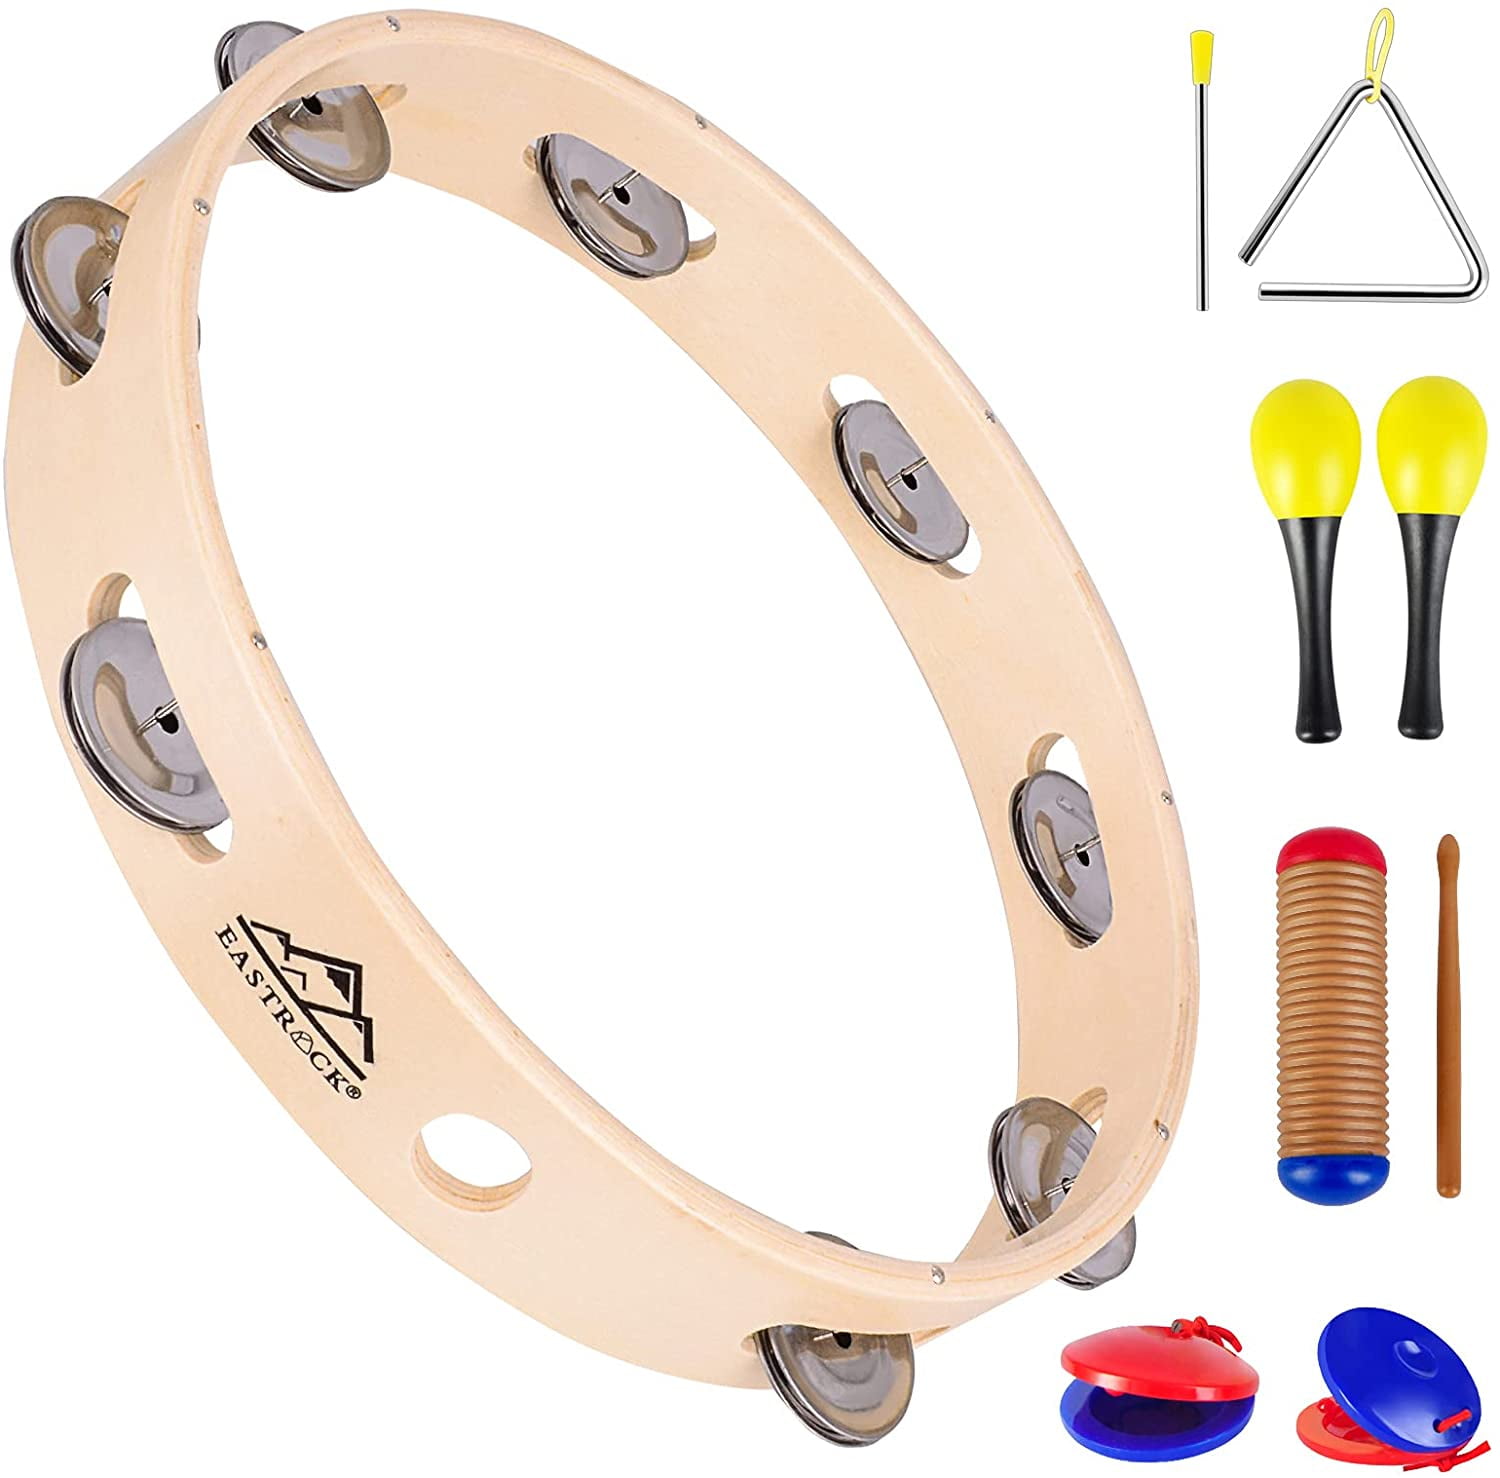 Party BLUE EastRock Tambourine,Metal Jingles Hand Held Percussion-Half Moon Tambourine for Kids KTV Adults 